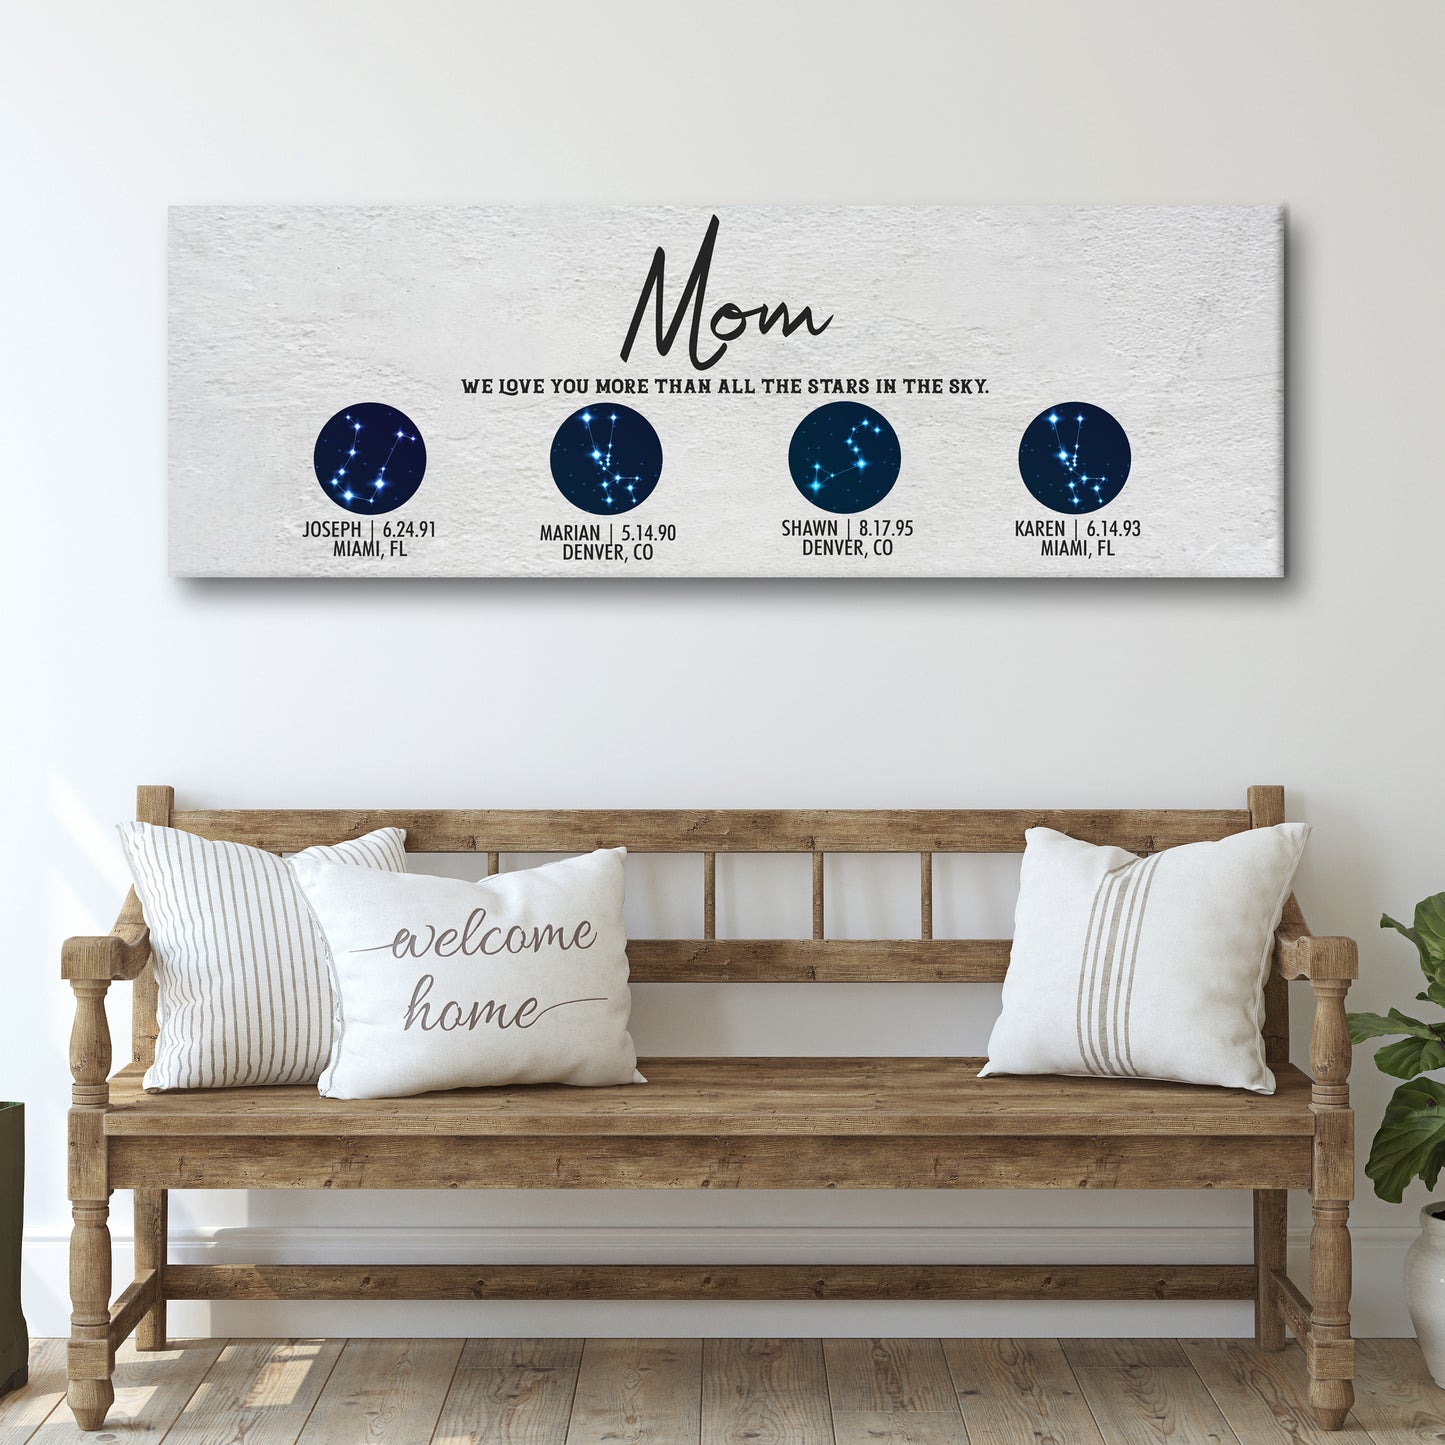 MOM, We love you more than the stars Sign - Image by Tailored Canvases